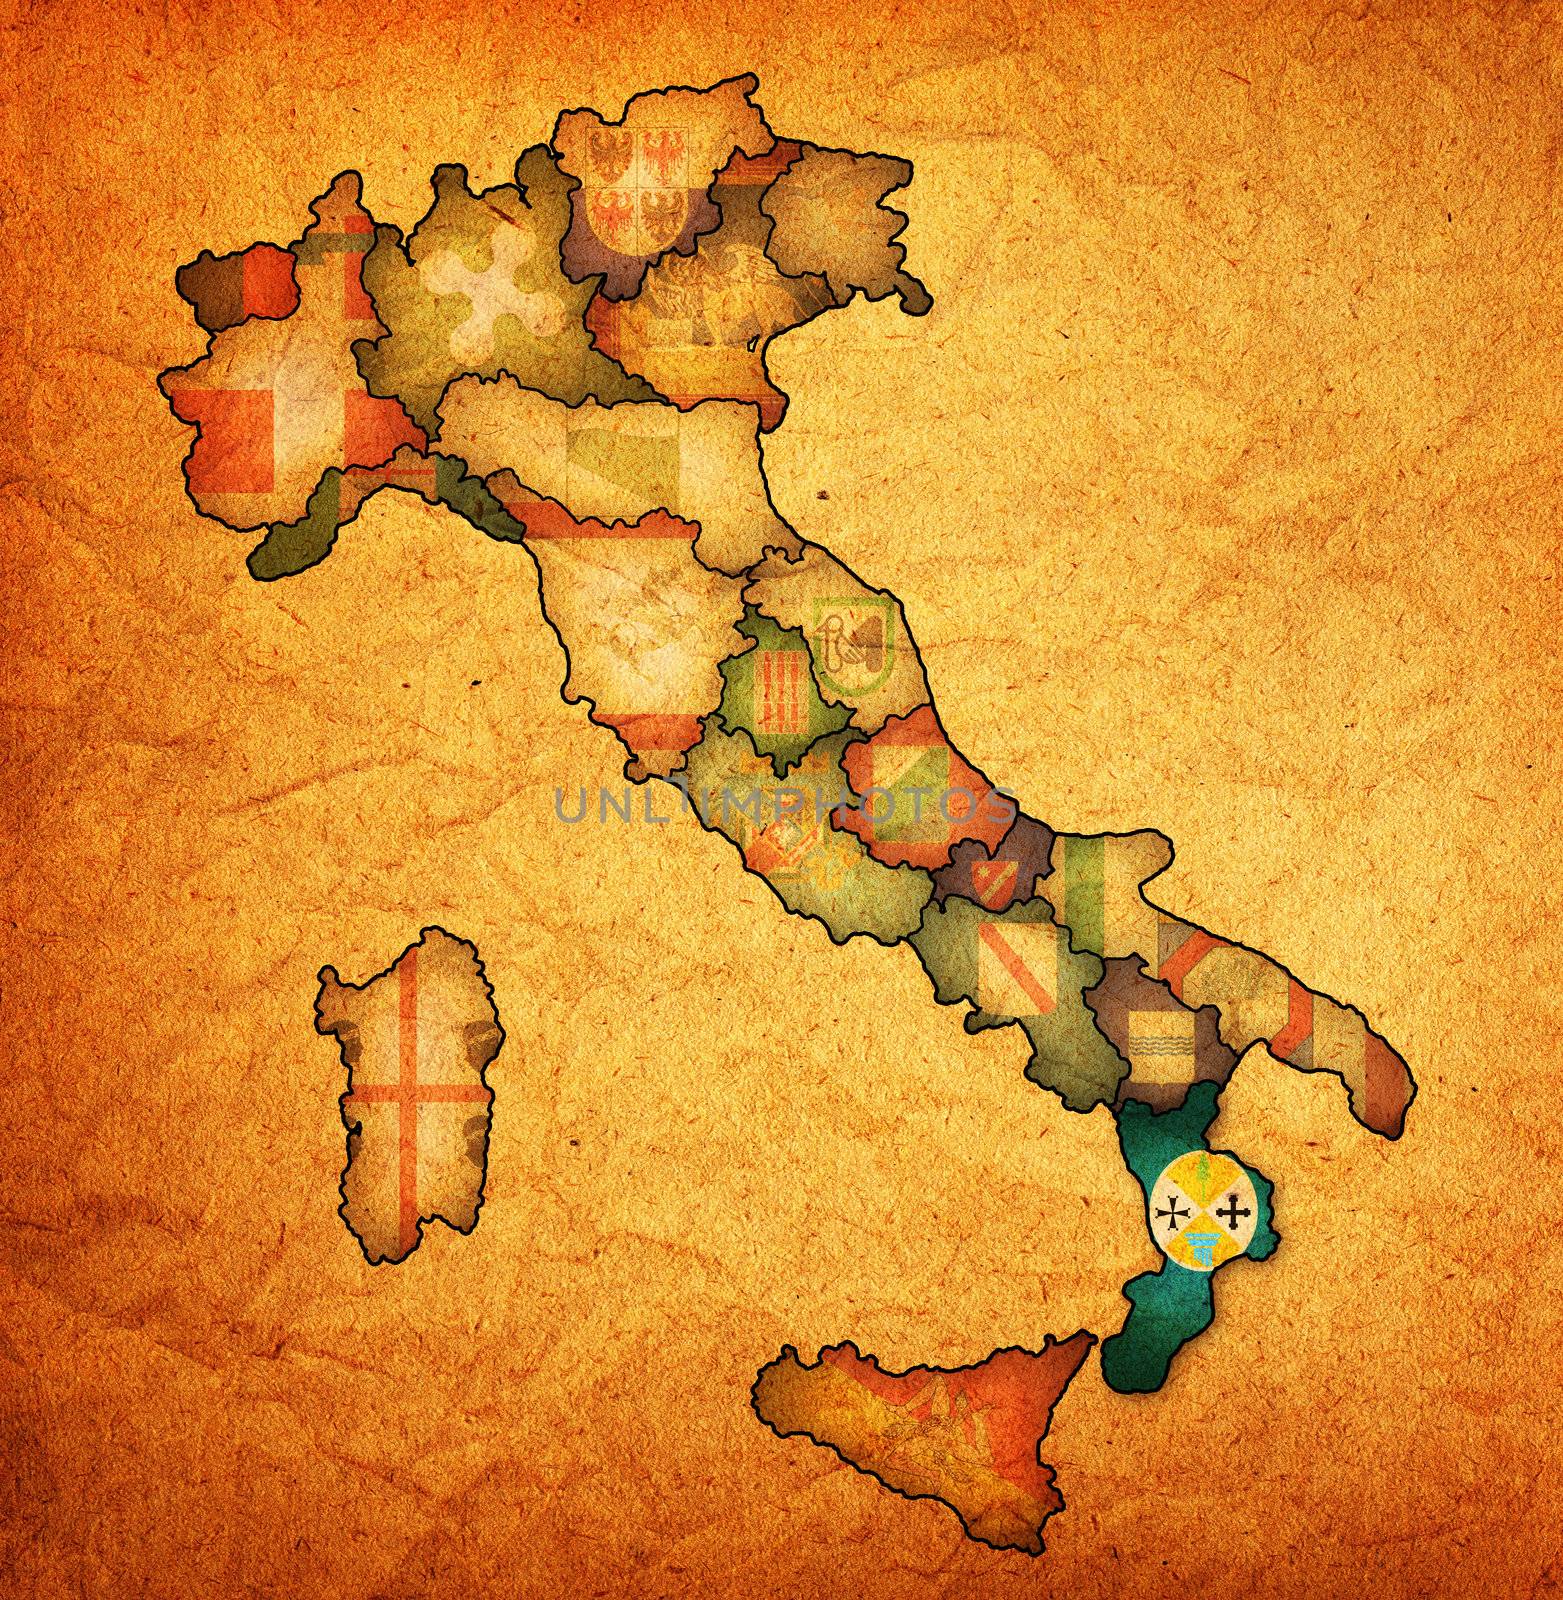 calabria region on administration map of italy with flags